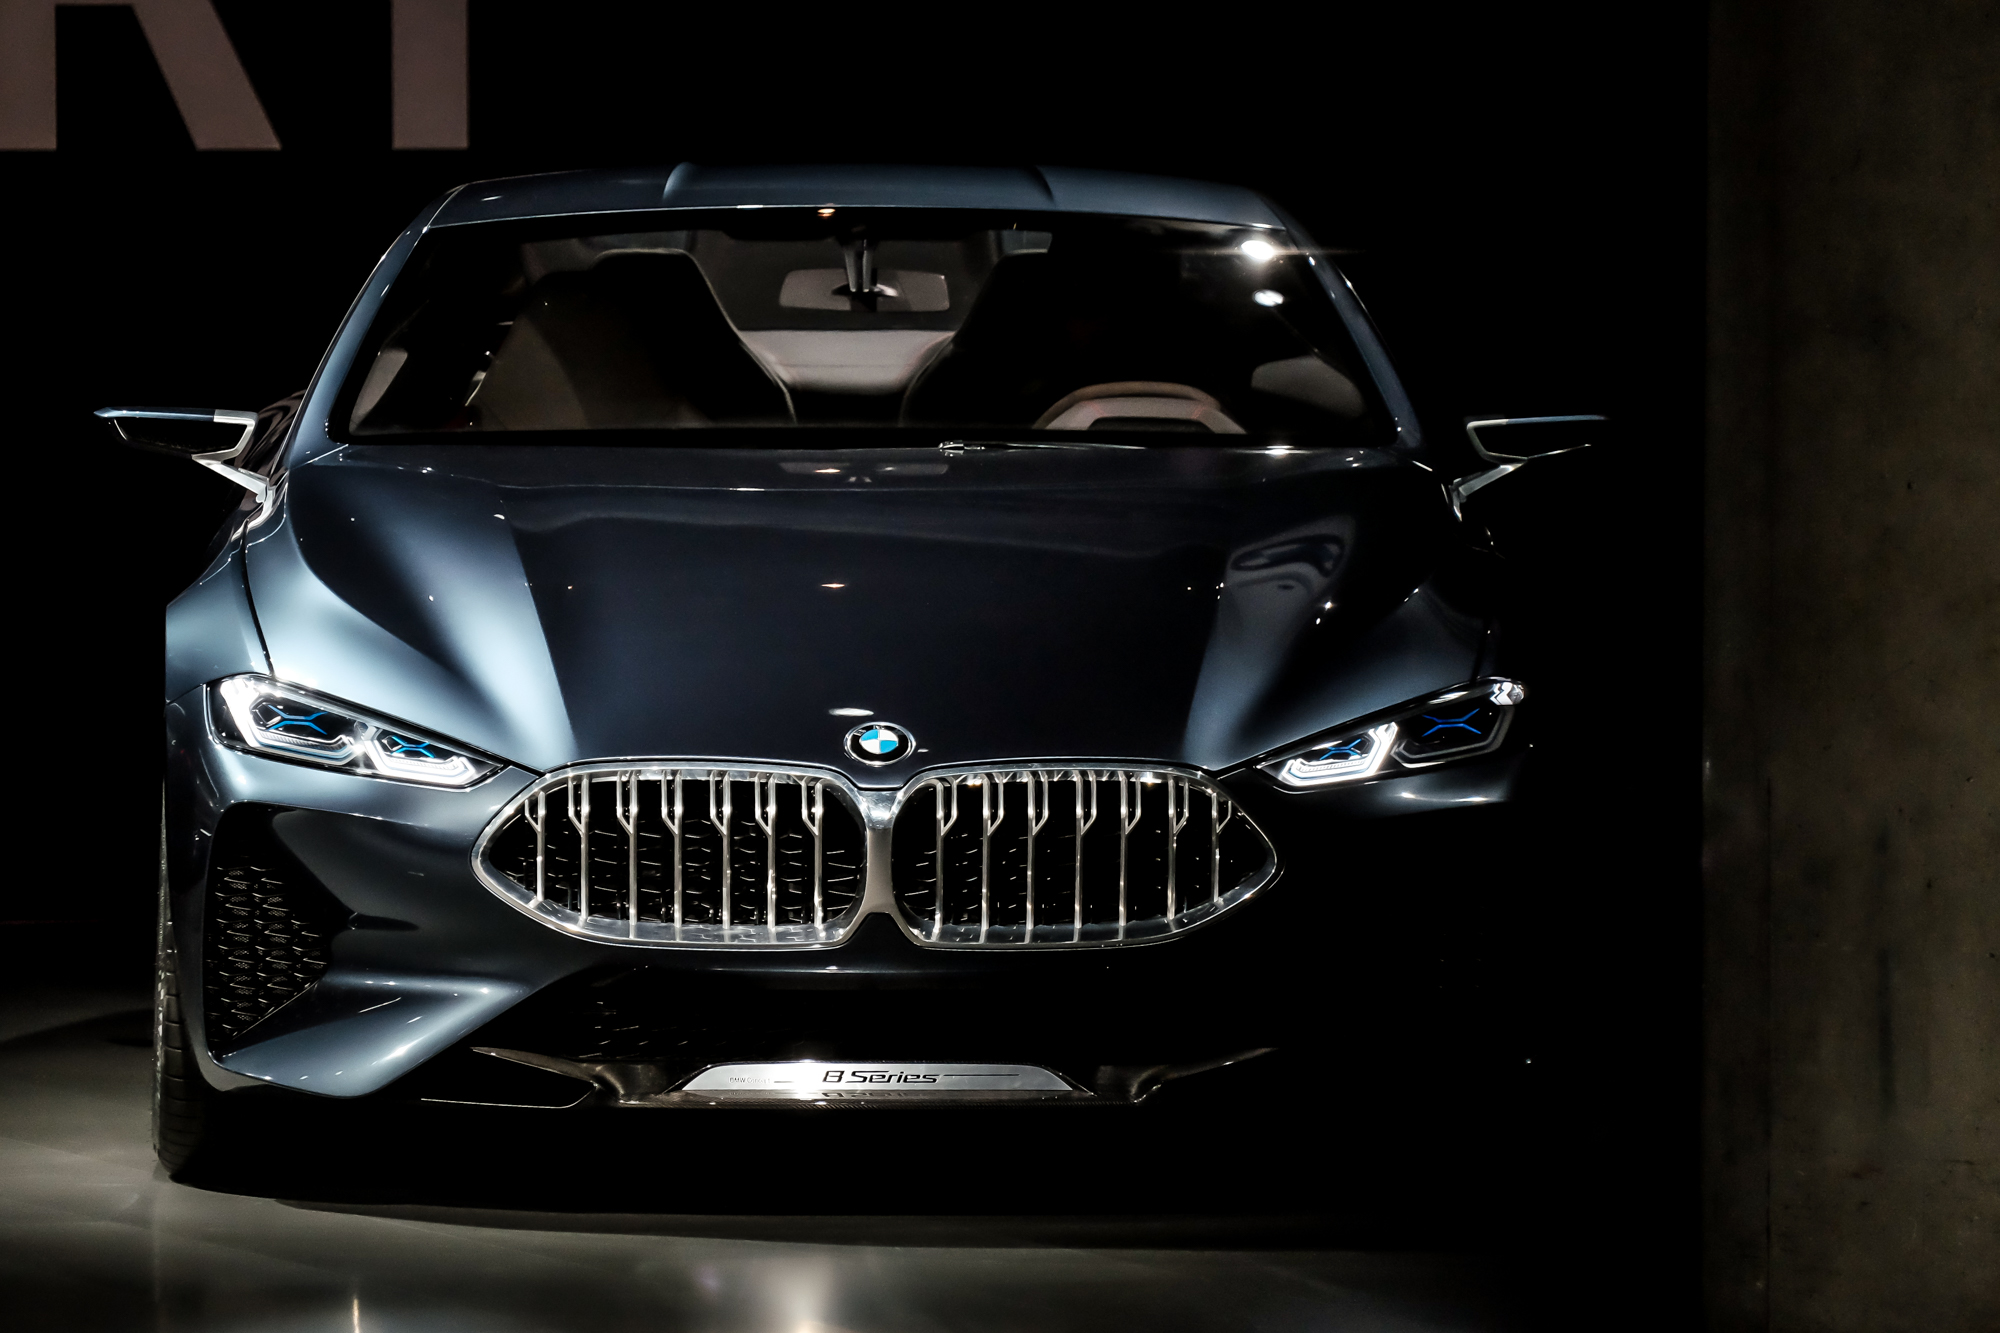 The front end of the BMW Concept 8 Series looks so angry and we love it. , <i>Sam Bendall</i>